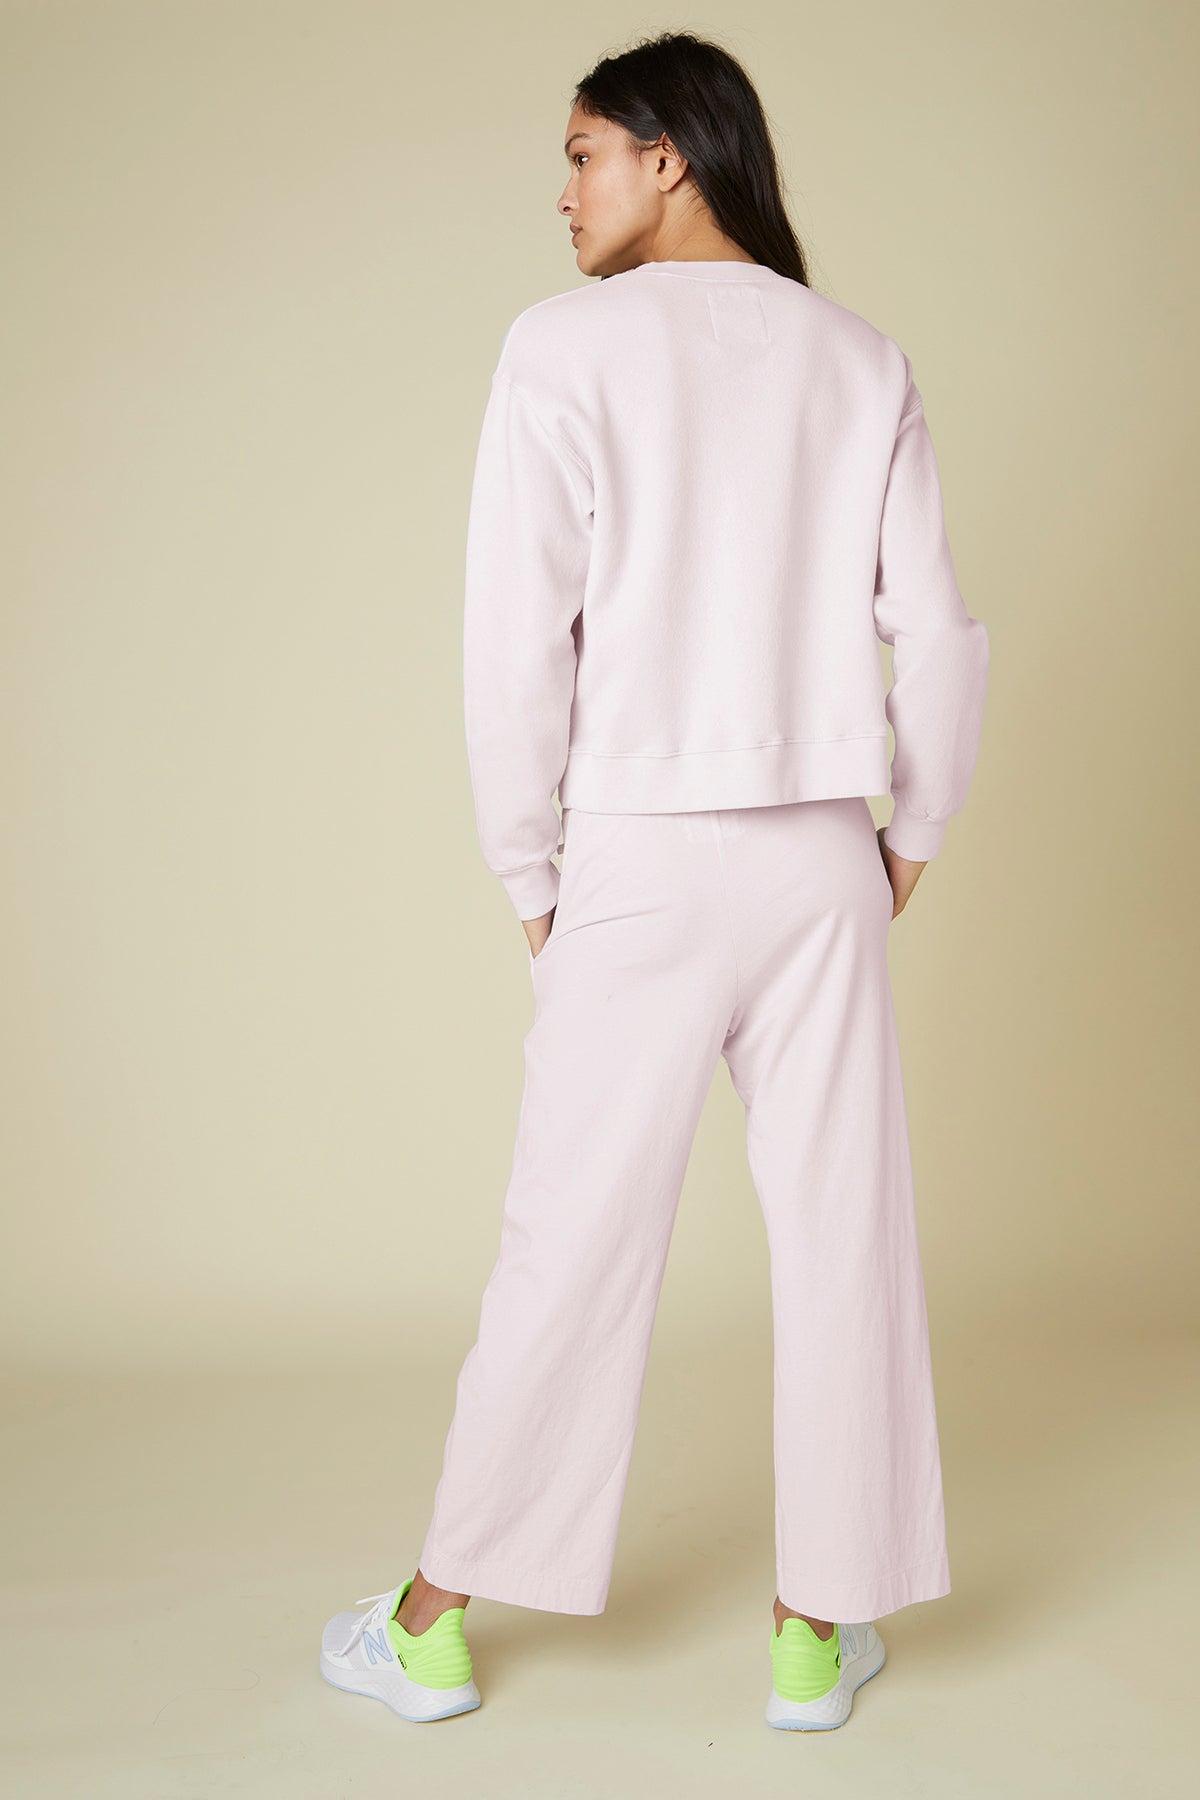 Pismo Pant in Pale Pink Back-24782949548225